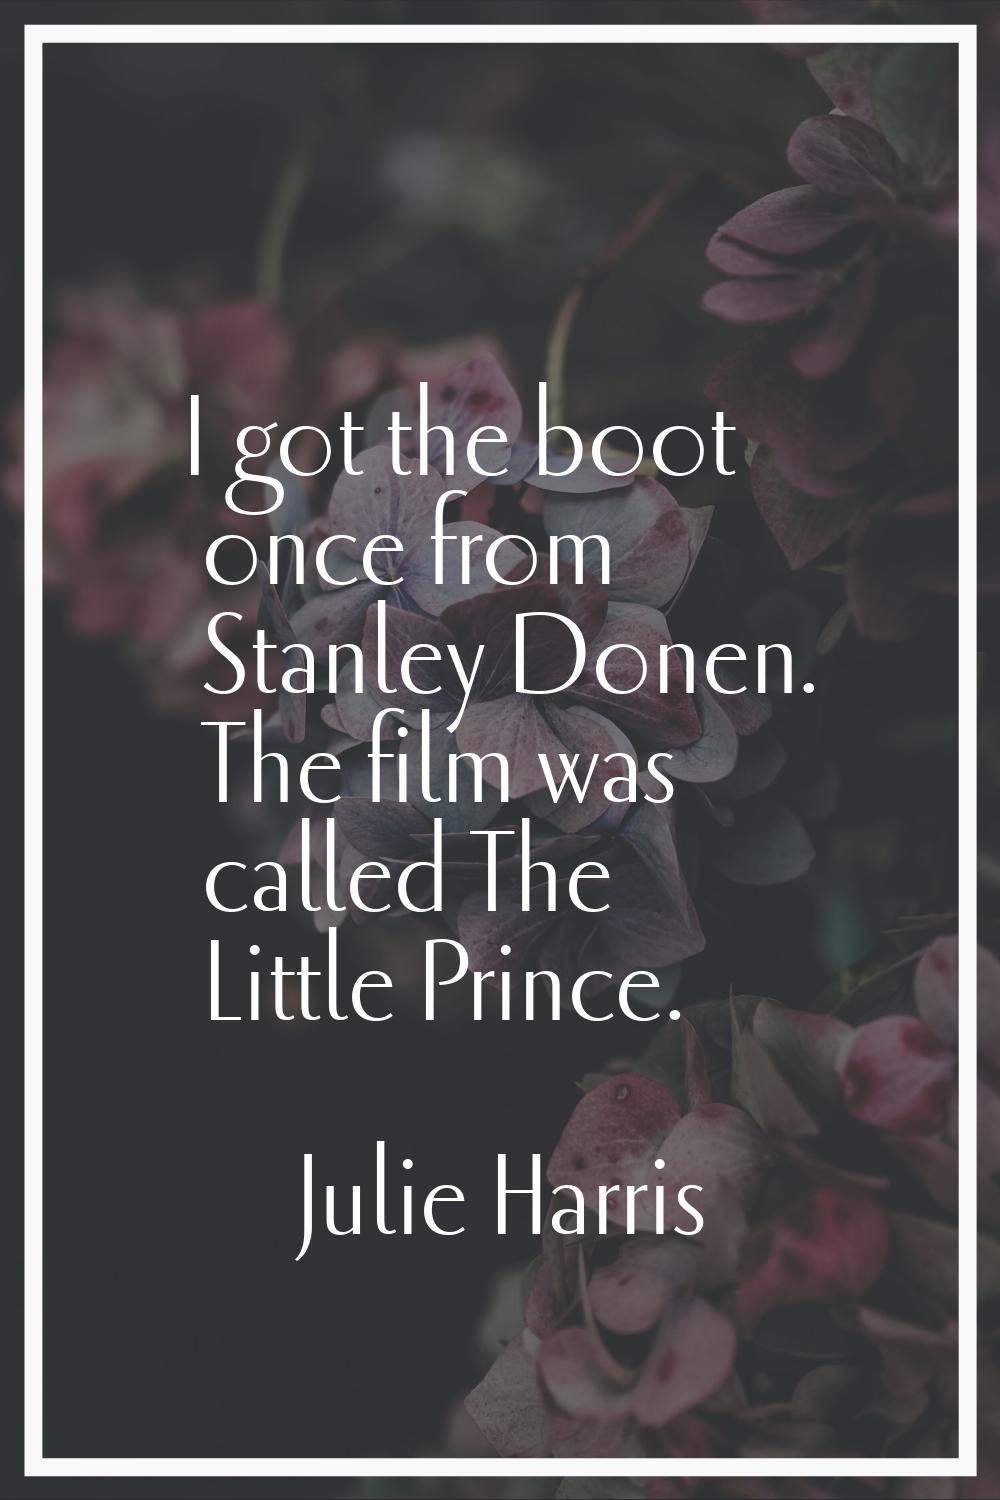 I got the boot once from Stanley Donen. The film was called The Little Prince.